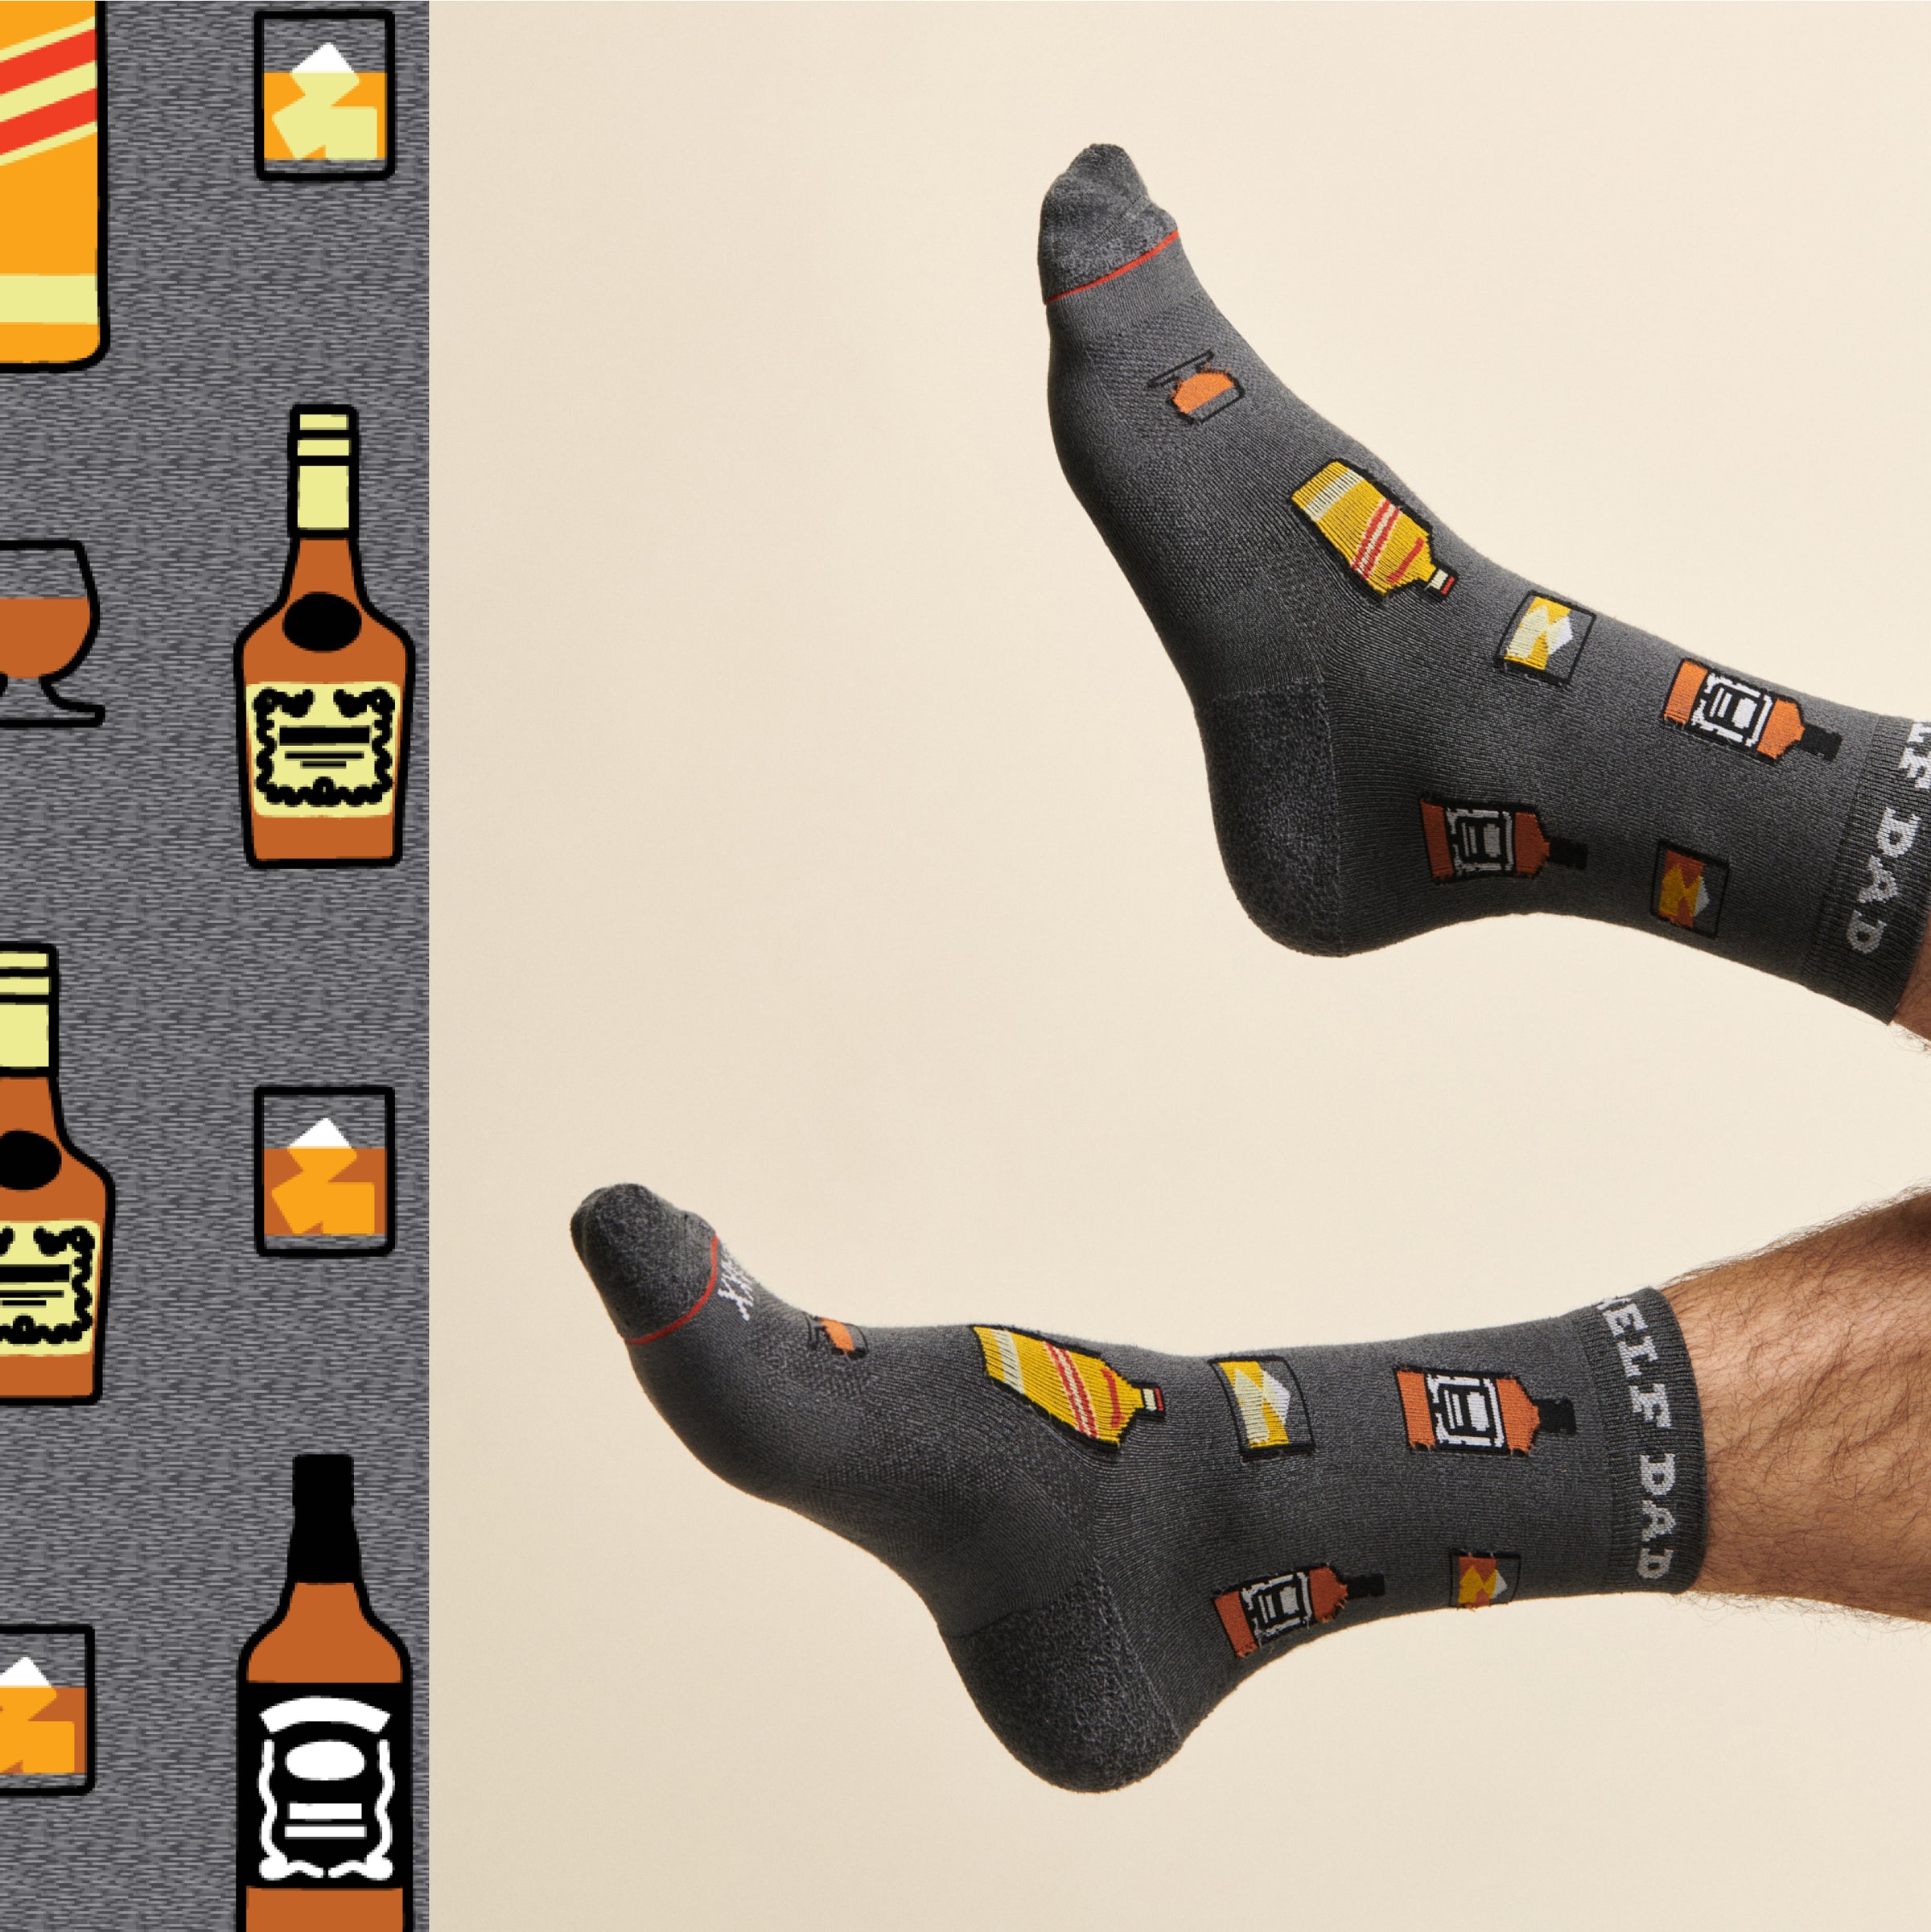 A pair of male feet wearing a pair of gray SAXX socks patterned in a cocktail theme, with "Top Shelf Dad" around the cuff.